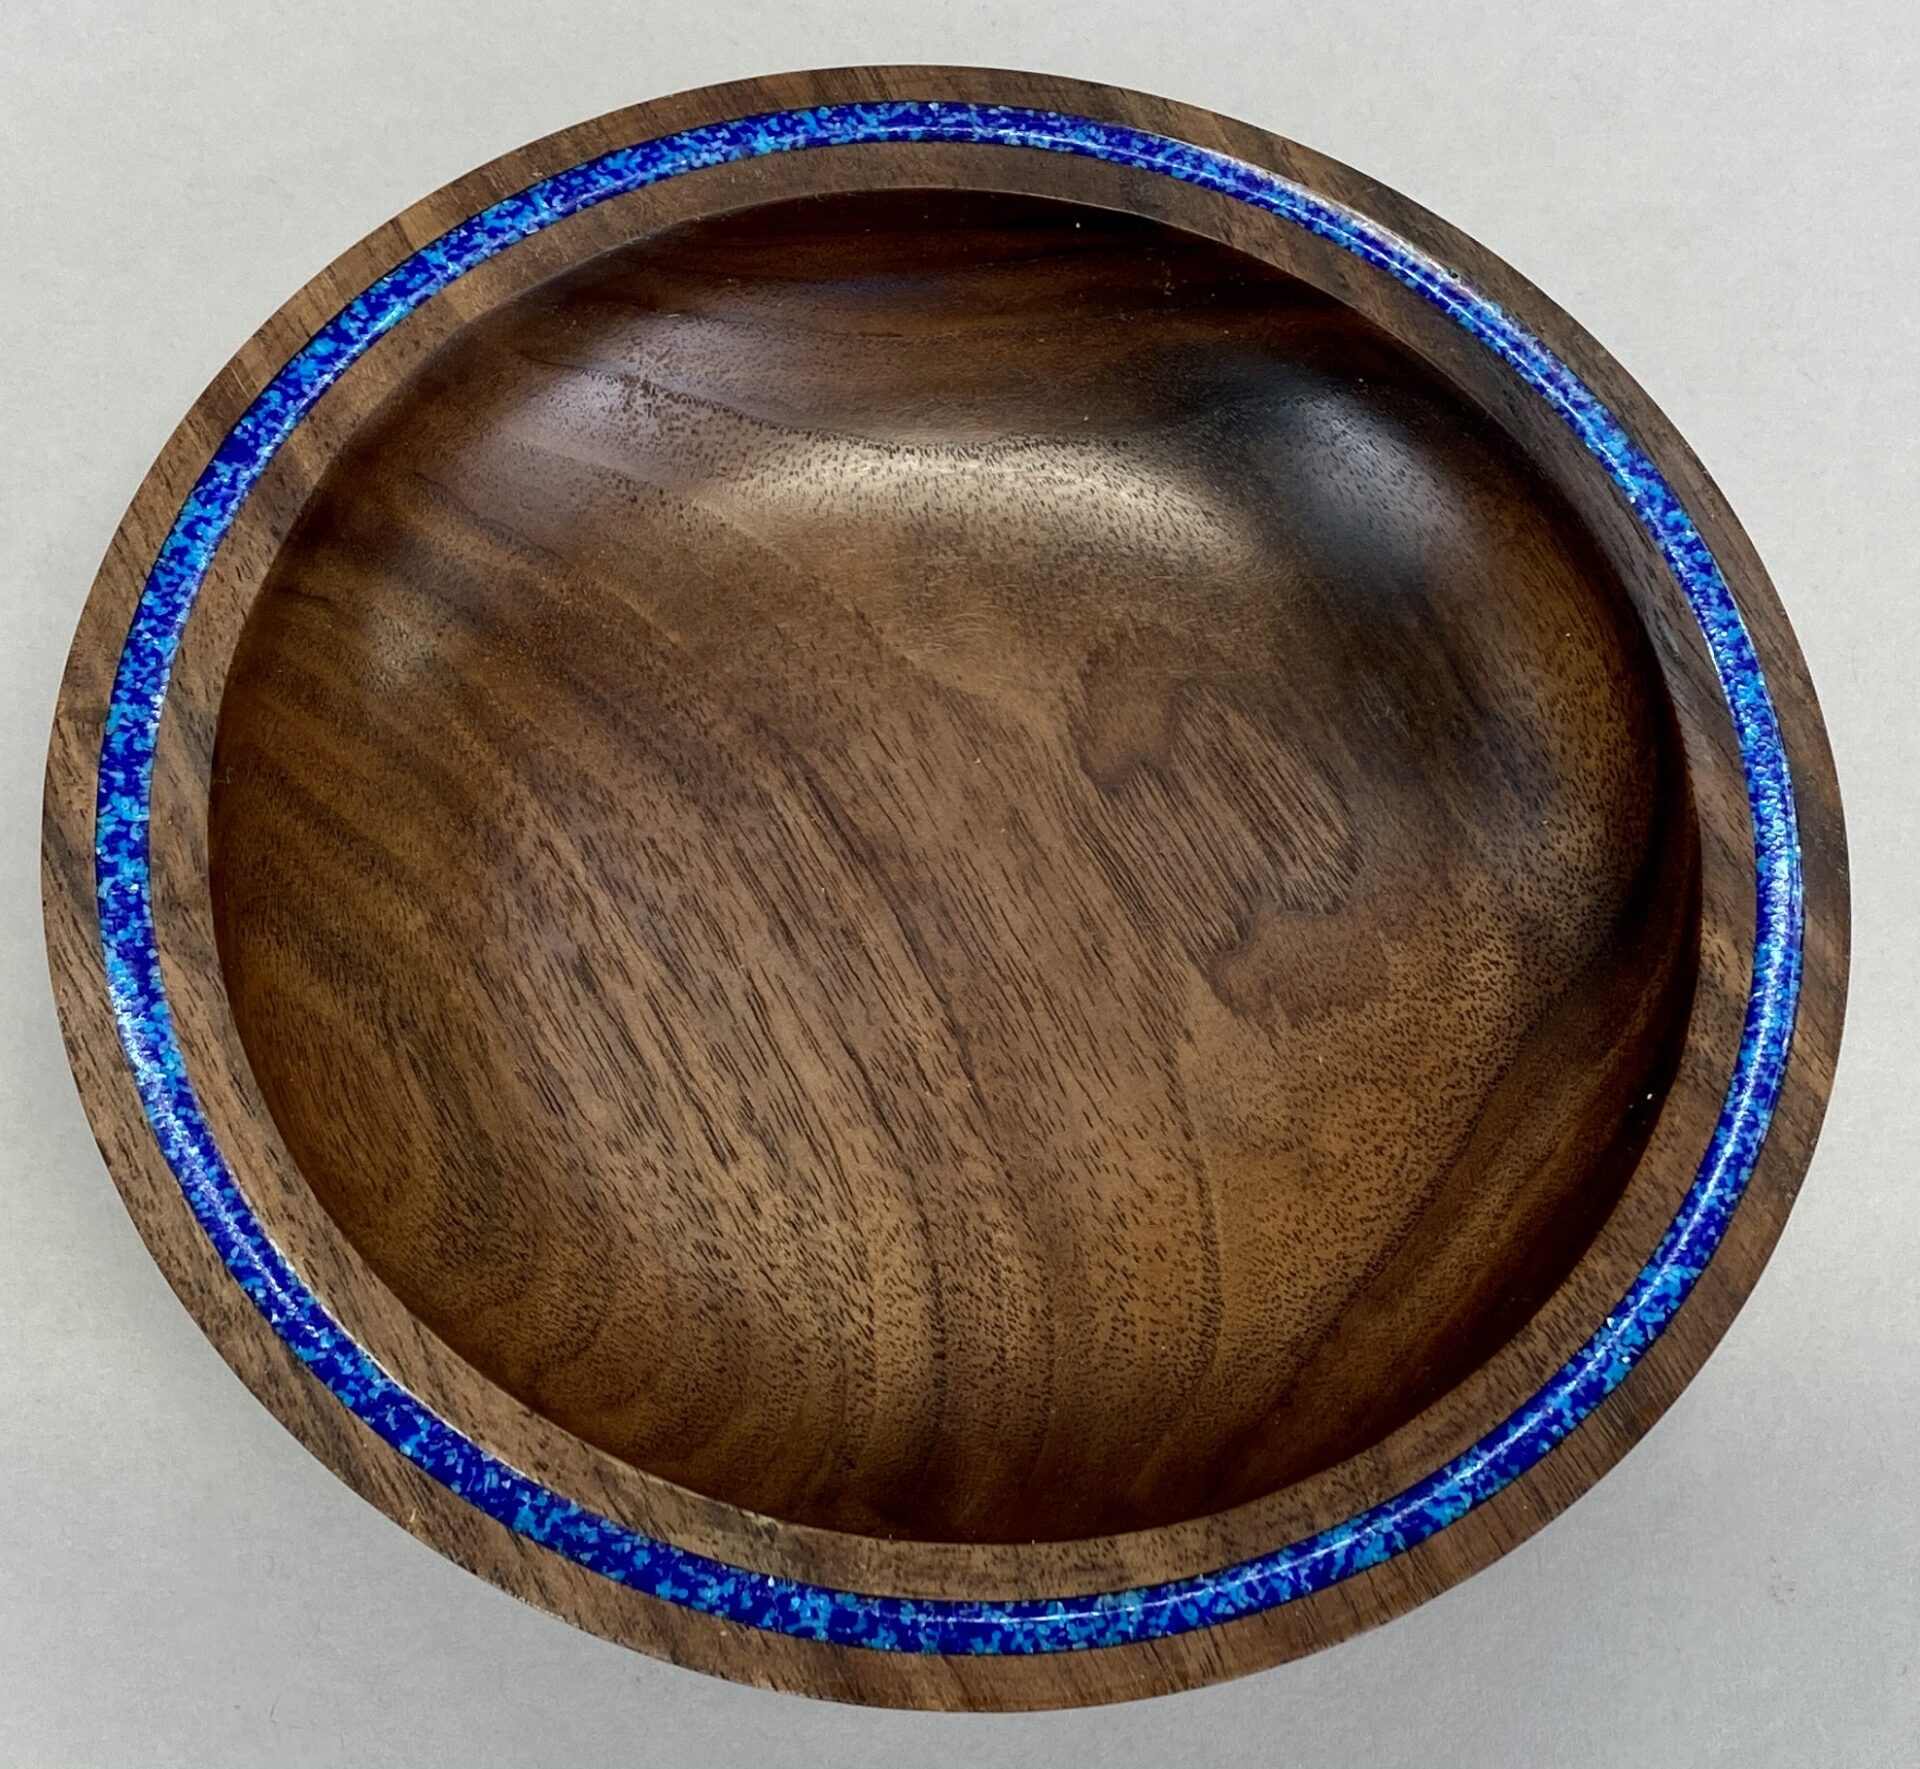 a wooden bowl with the blue strip by AB Woodworking